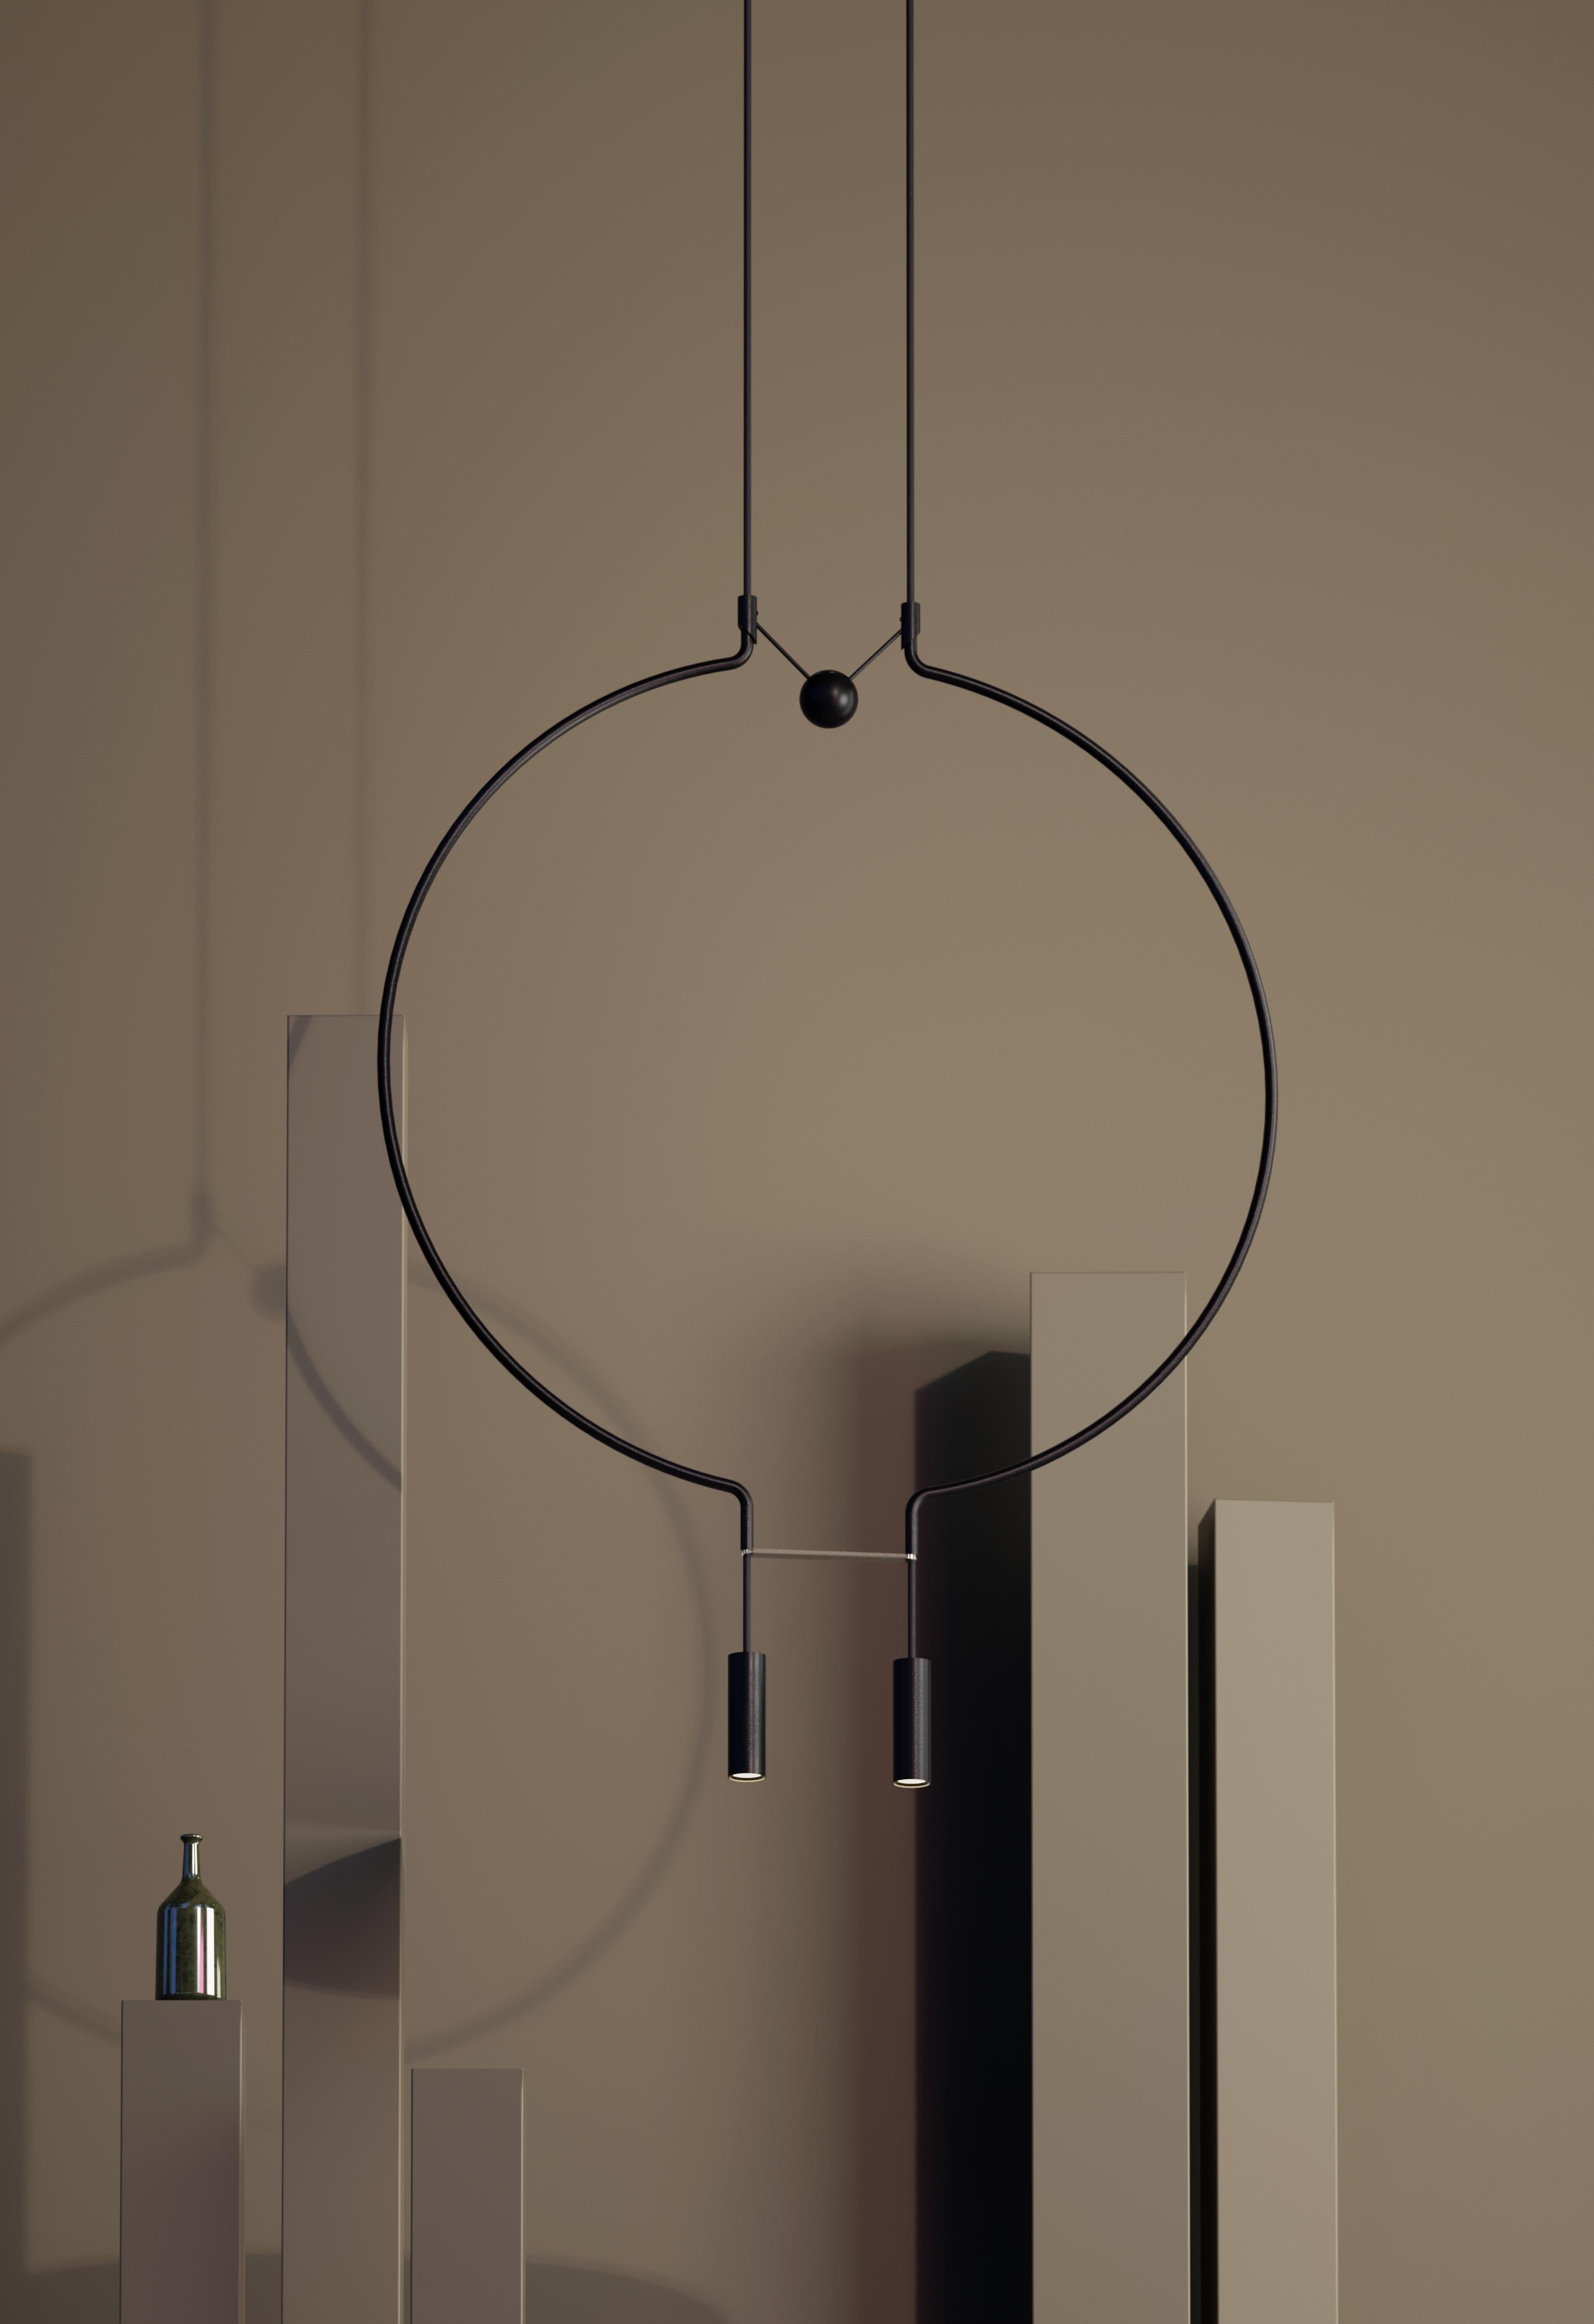 Hand-Crafted Axolight Liaison Model G8 Pendant Lamp in Black/Black by Sara Moroni For Sale